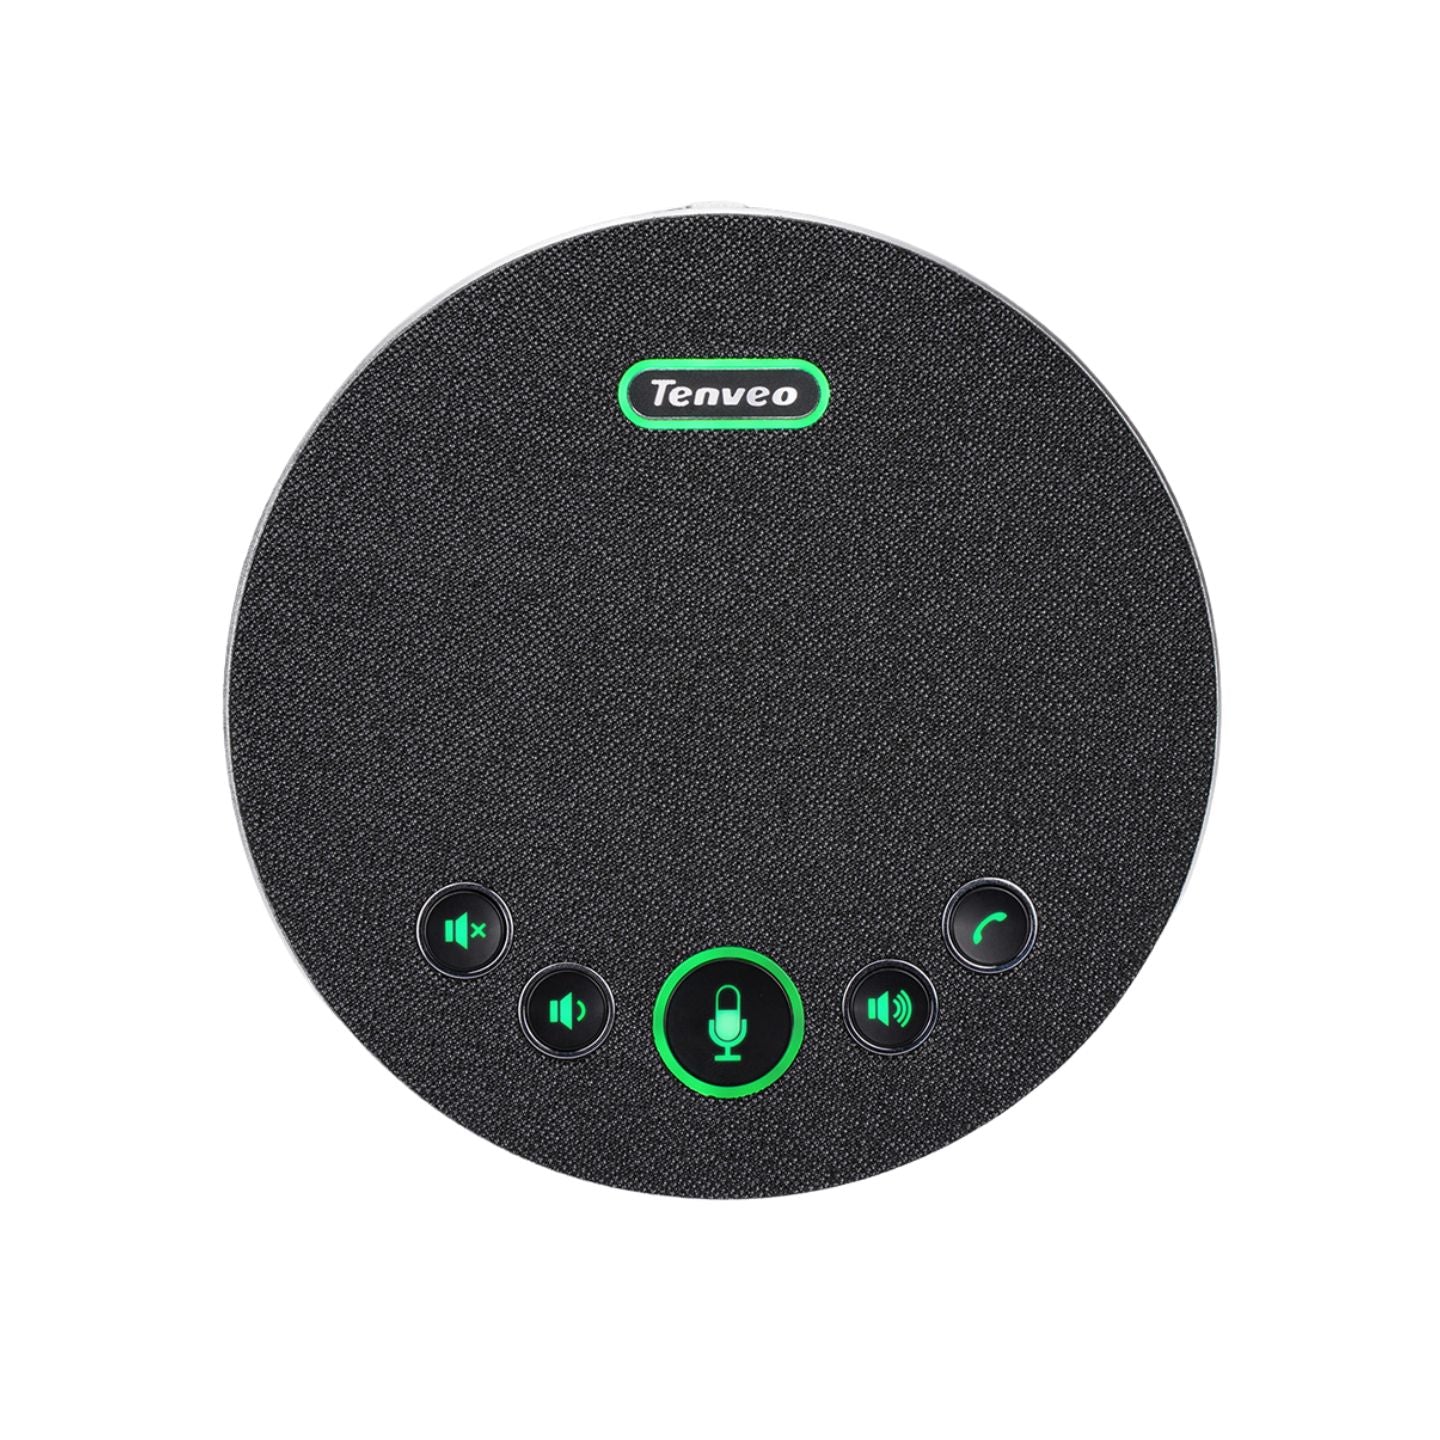 Tenveo M3B Portable Omnidirectional USB Microphone Speaker with Bluetooth, 3.5mm AUX Audio Output, Echo Cancellation, Noise Reduction for Conference Meetings